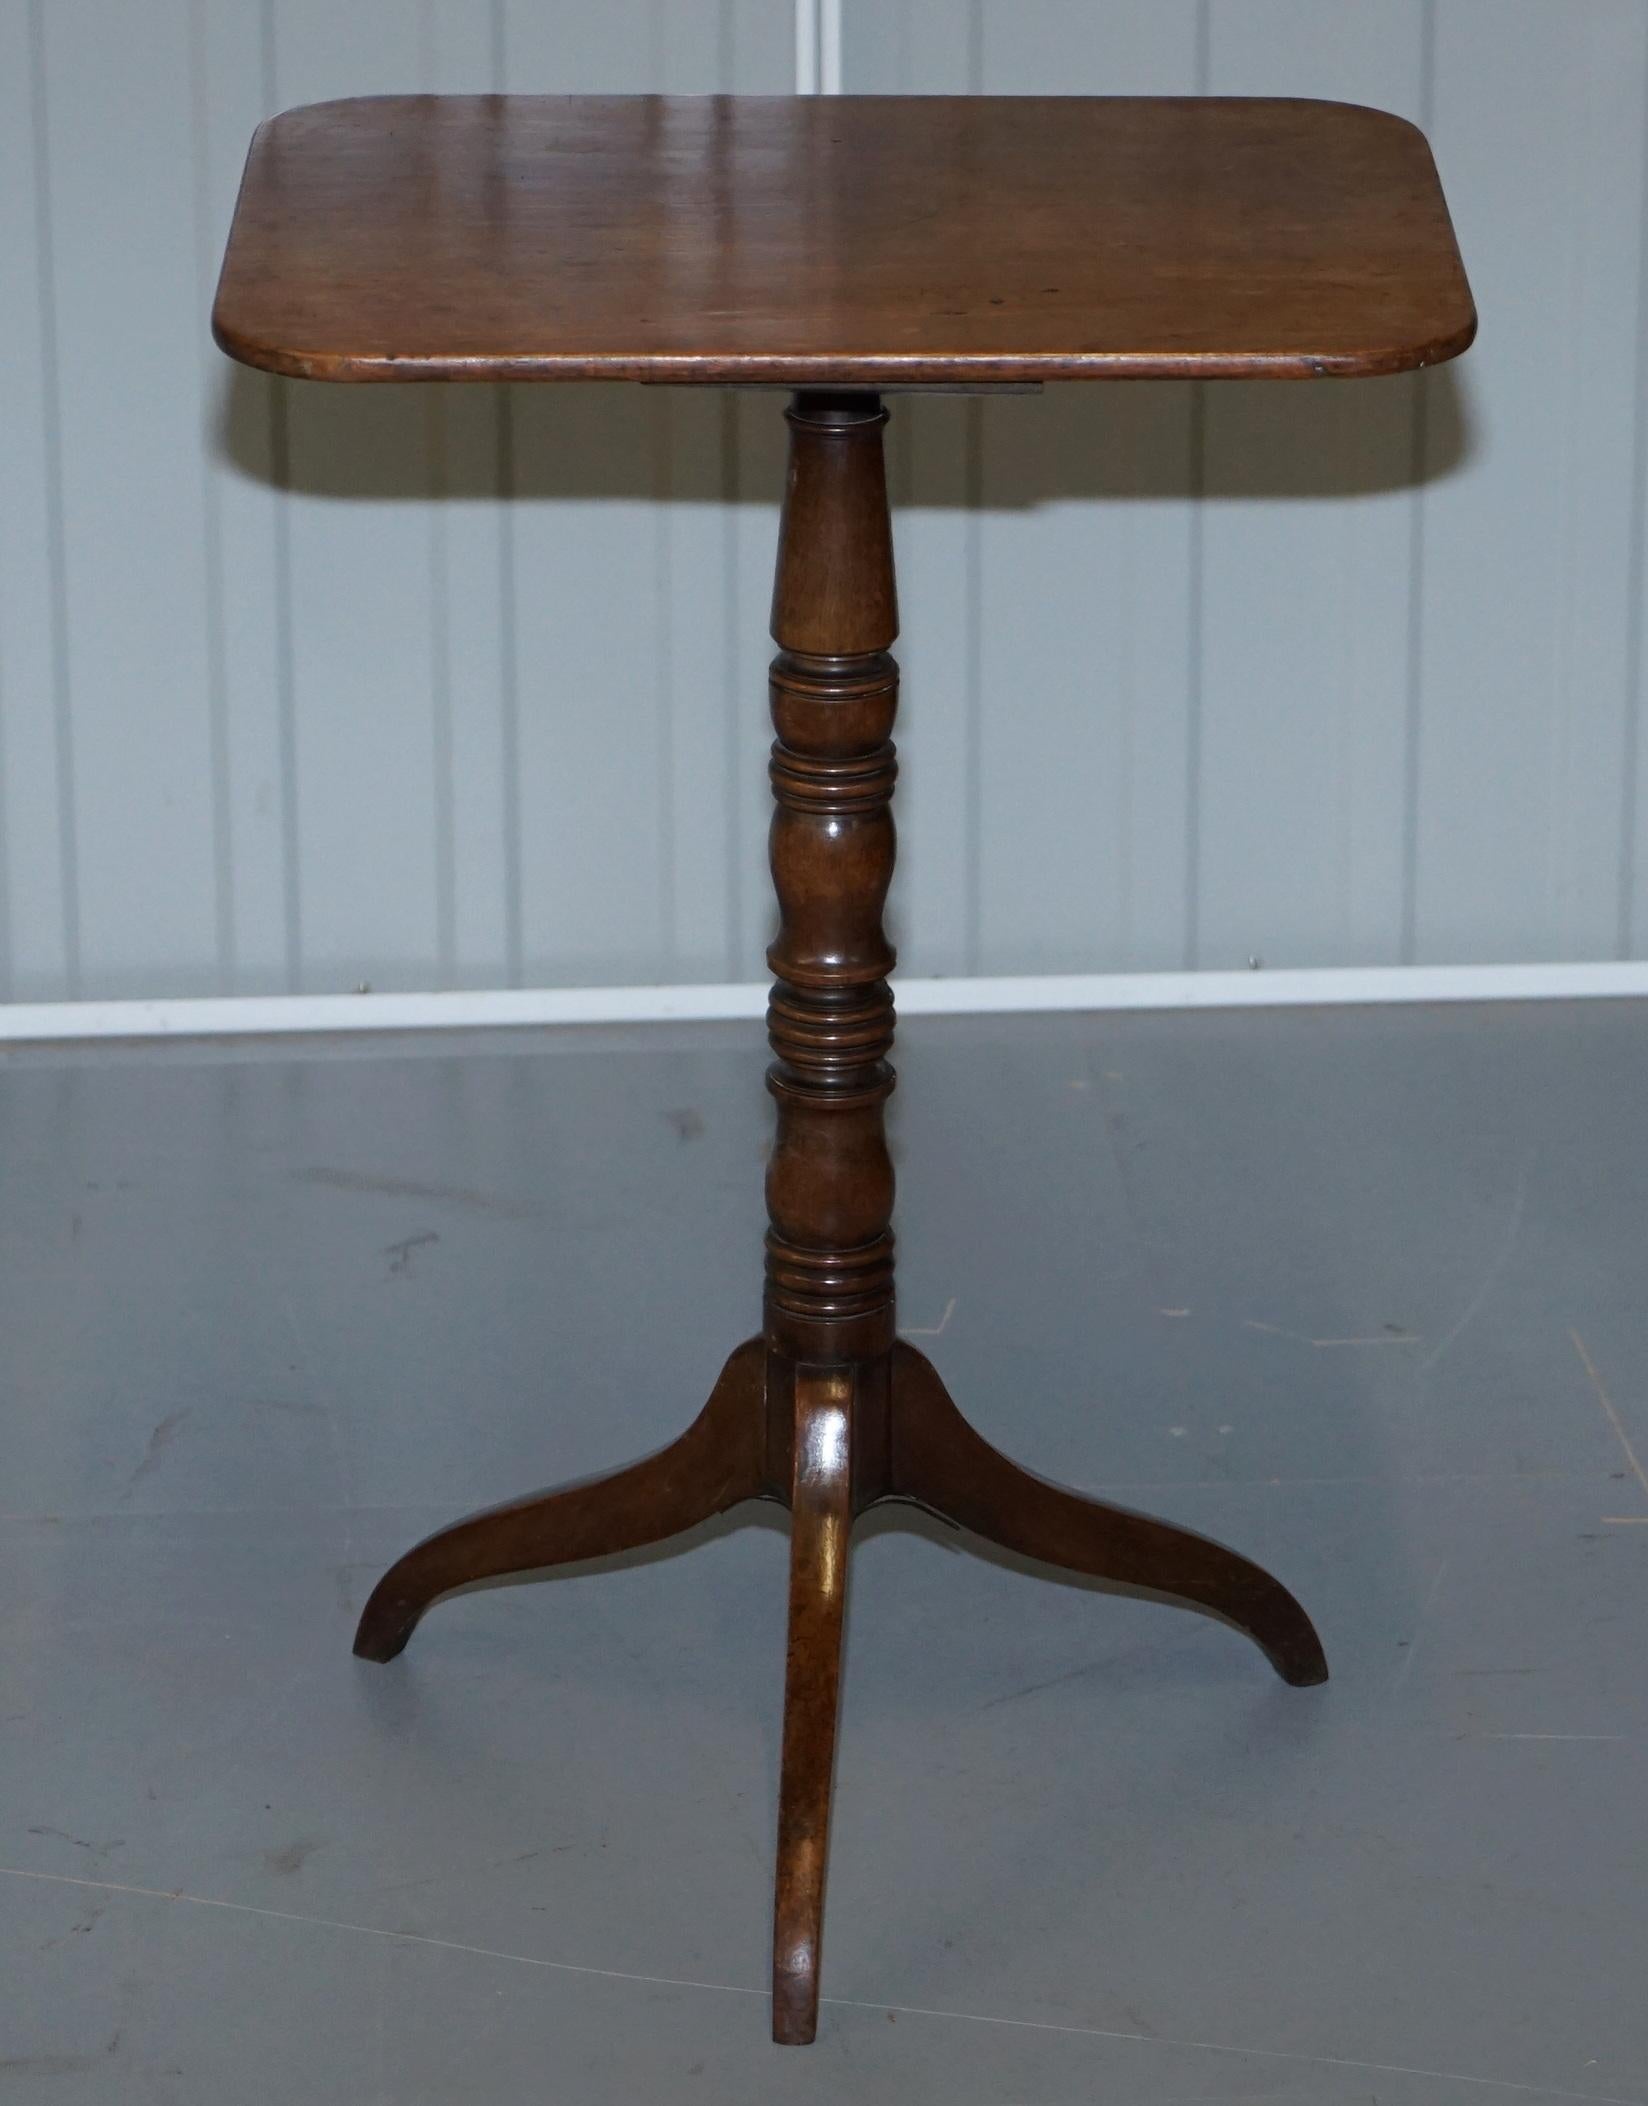 We are delighted to this lovely circa 1880 walnut side table with tripod base

A good looking well-made and multi-functional piece of furniture, ideally suited as a lamp wine or even games card table,

We have deep cleaned hand condition waxed